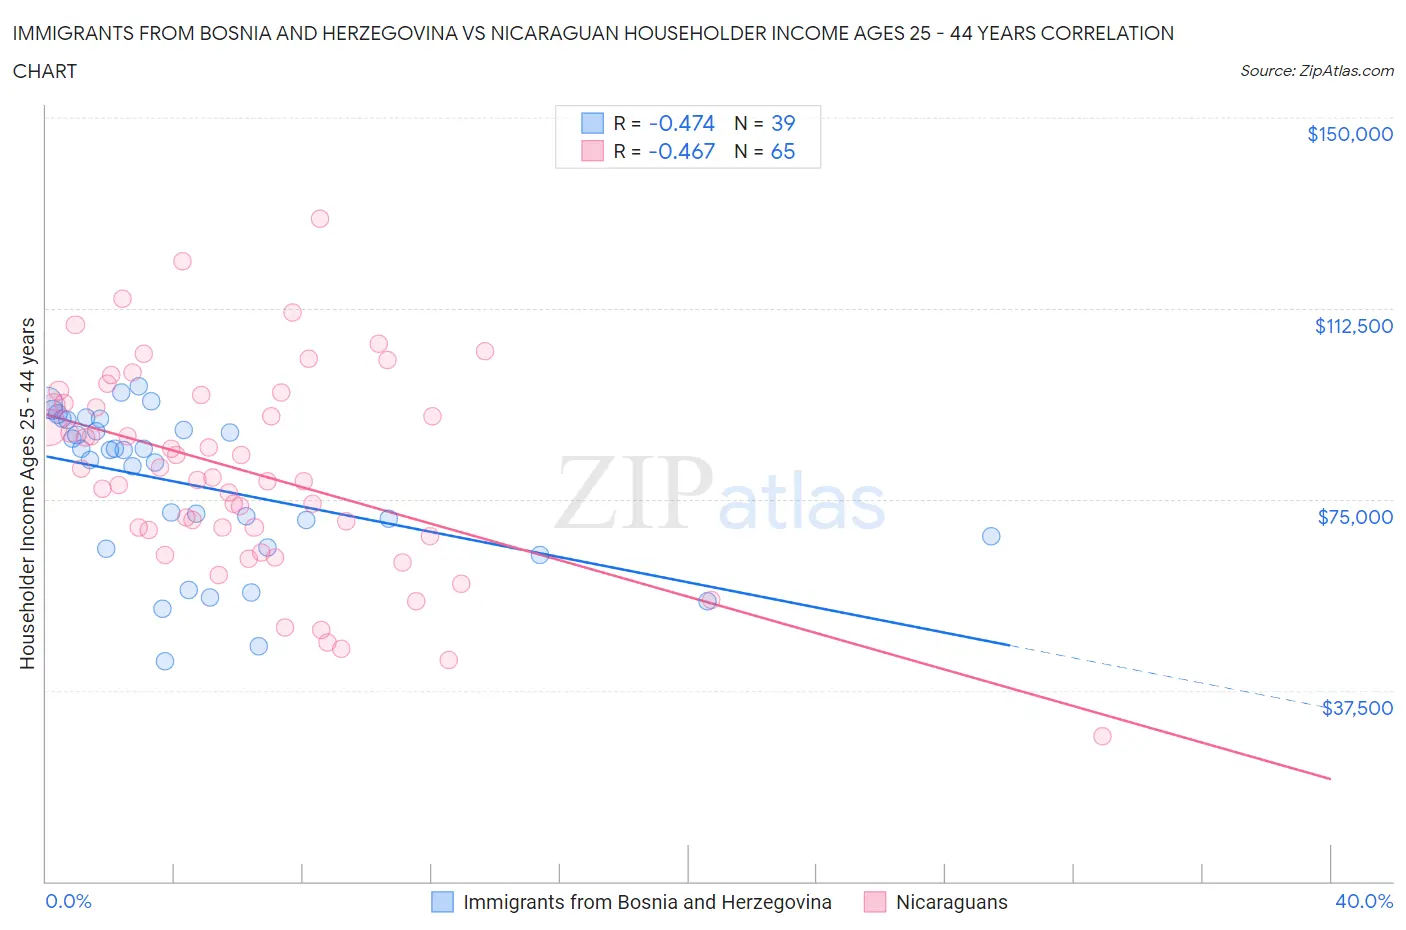 Immigrants from Bosnia and Herzegovina vs Nicaraguan Householder Income Ages 25 - 44 years